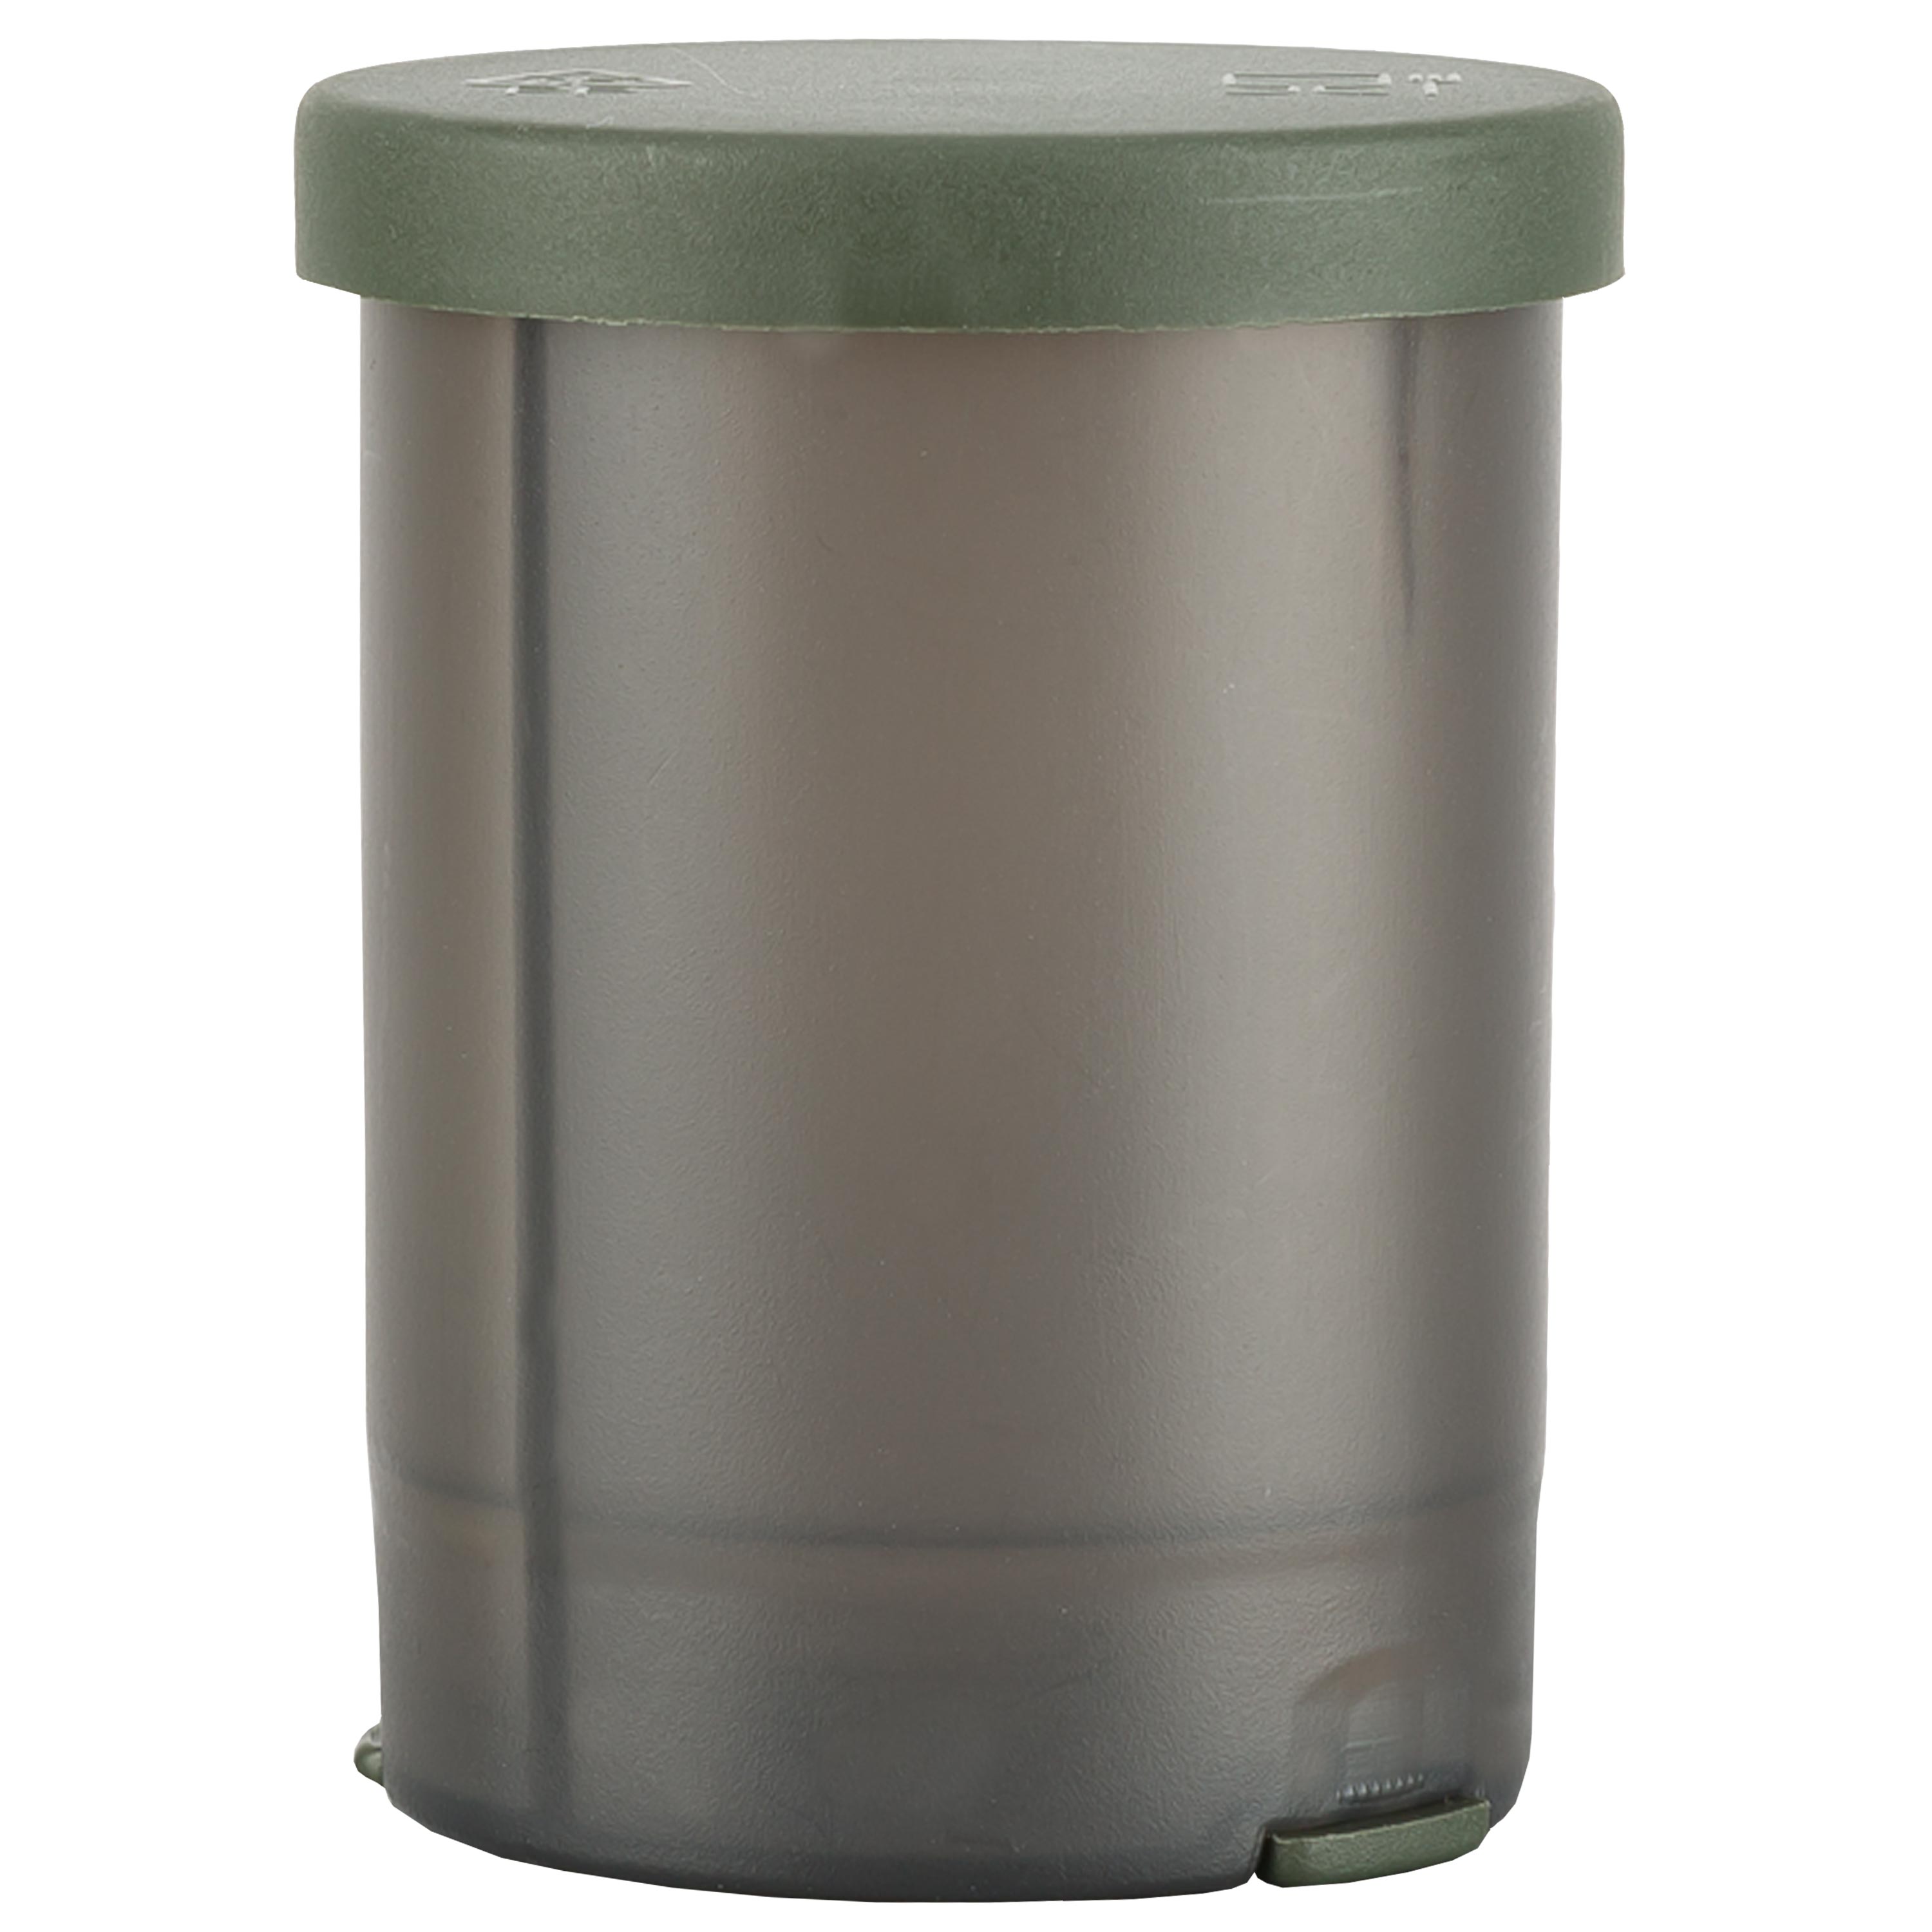 Purchase the Spice Shaker Wildo olive by ASMC